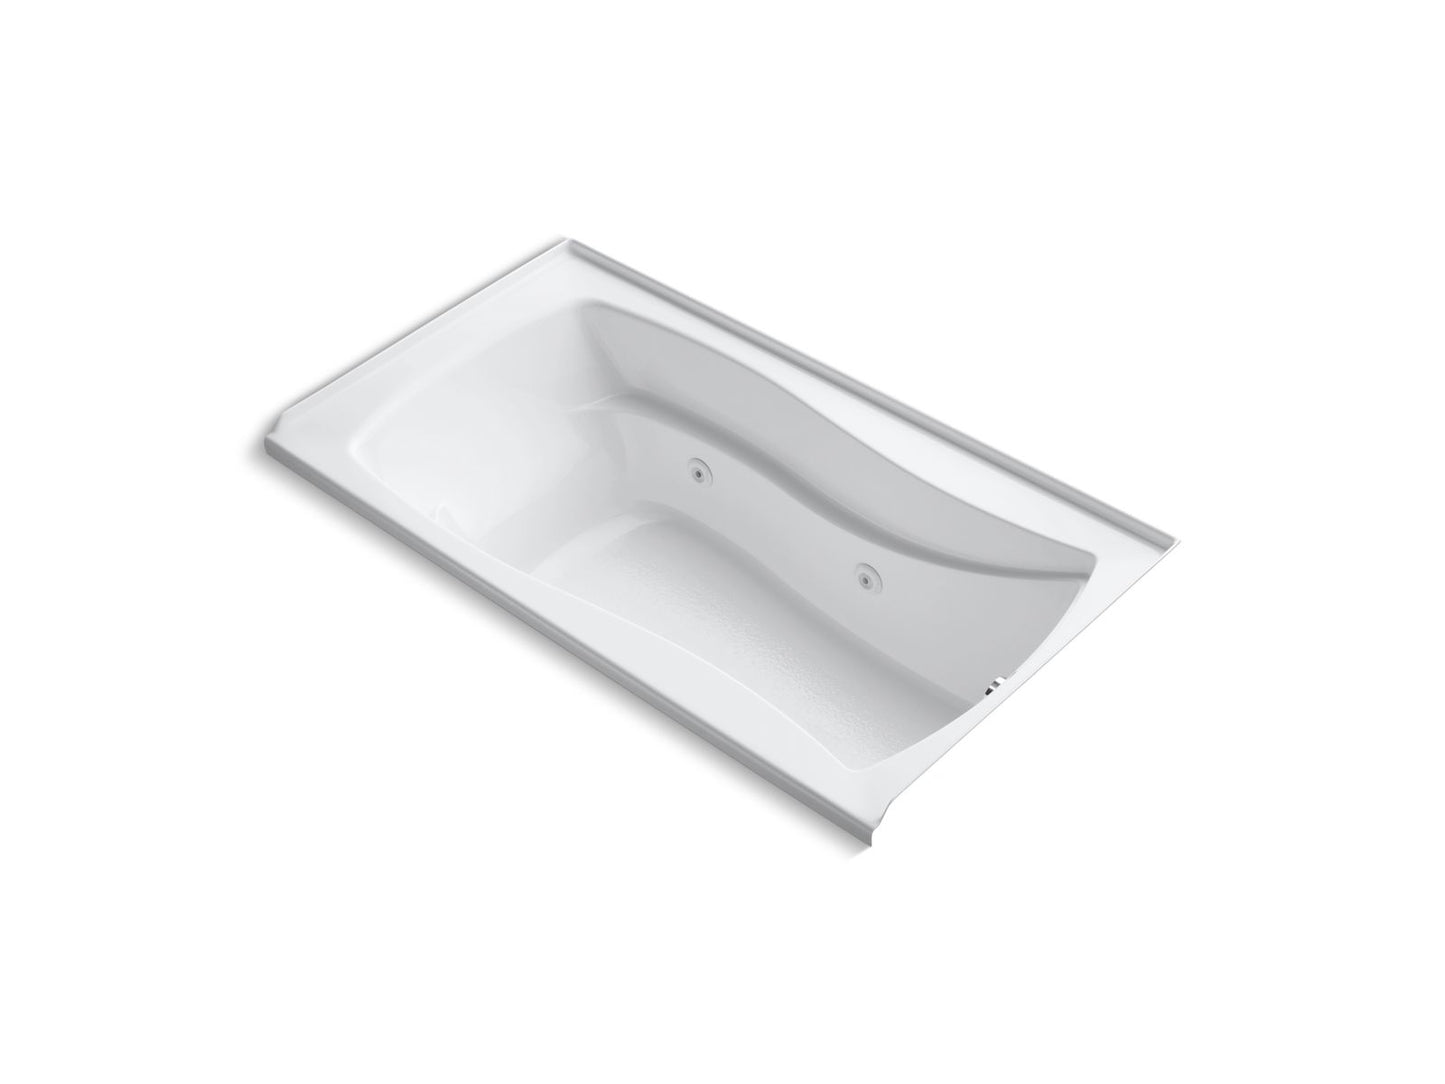 KOHLER K-1224-RW-0 Mariposa 66" X 35-7/8" Alcove Whirlpool Bath With Bask Heated Surface, Integral Flange, And Right-Hand Drain In White